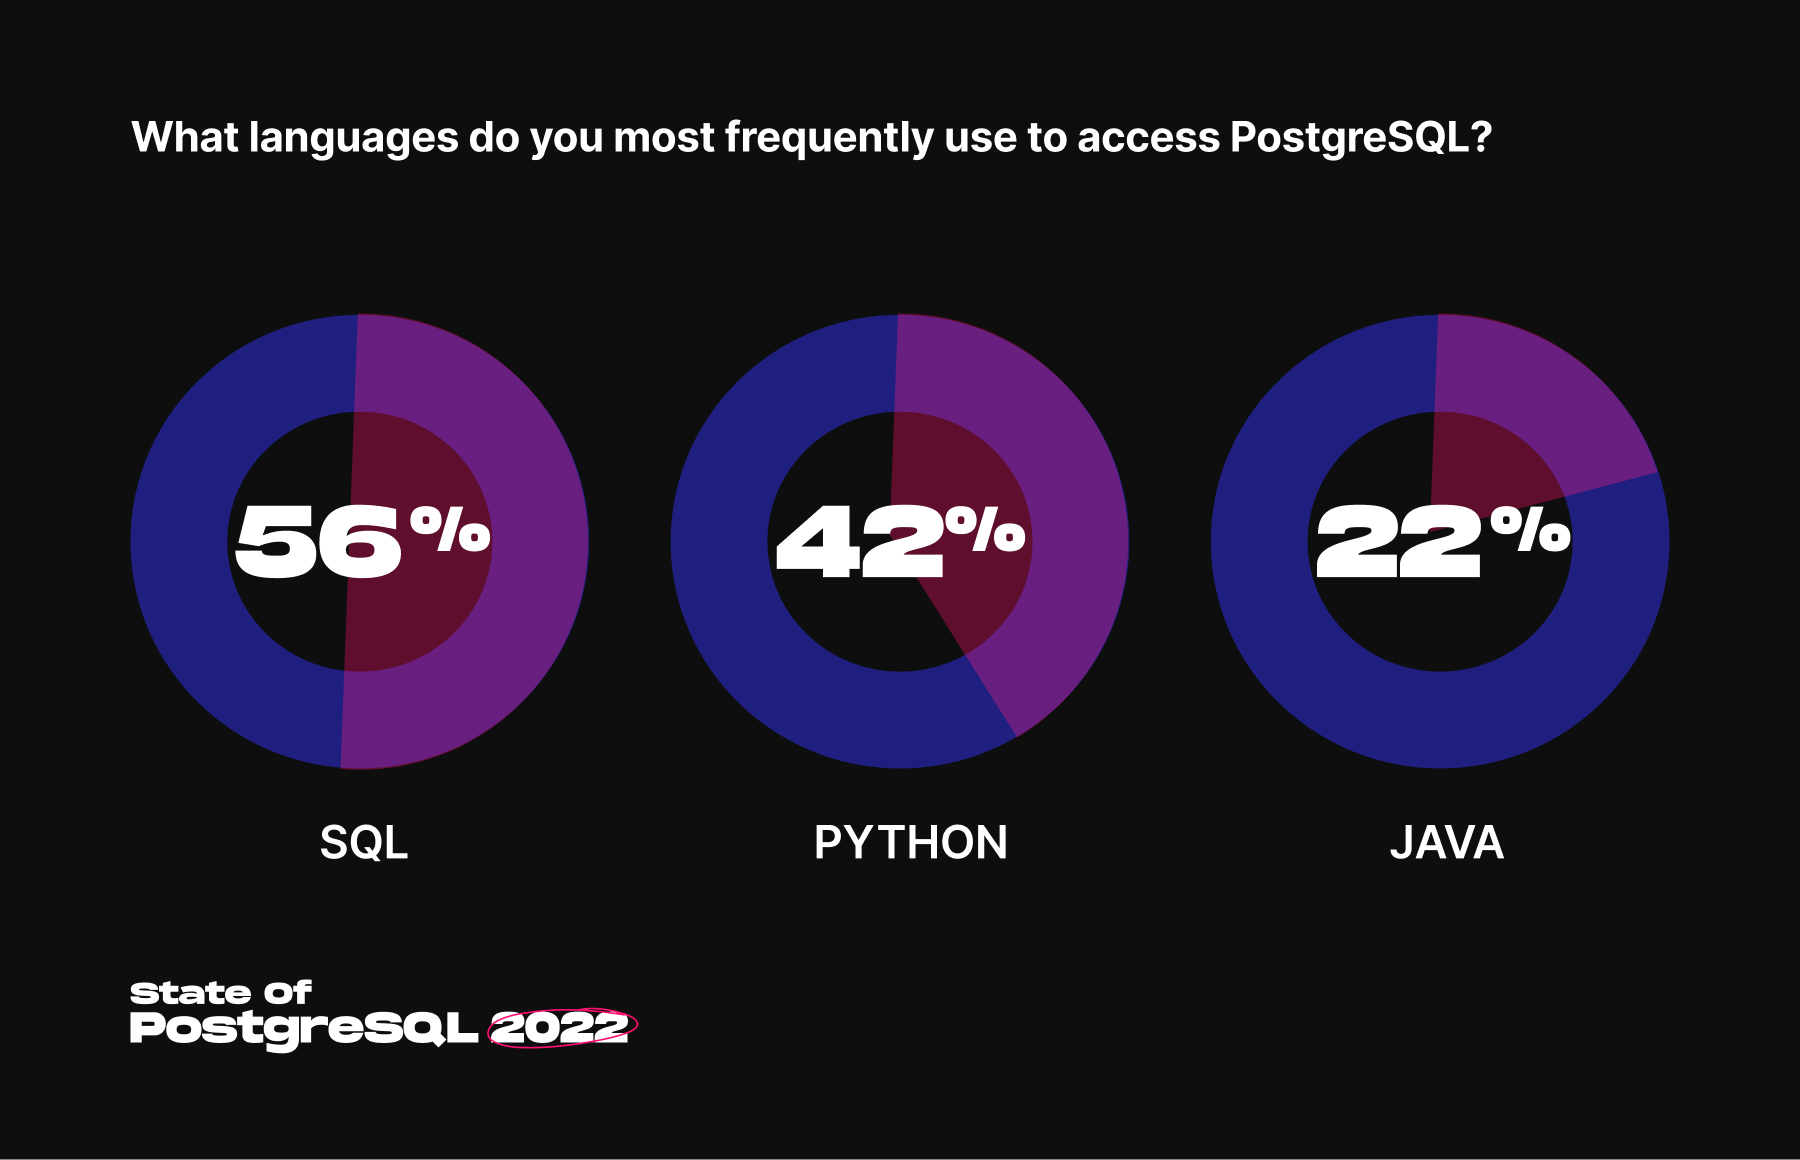 The top three languages favored by the State of PostgreSQL respondents. There is a pie chart for each language including their percentage.